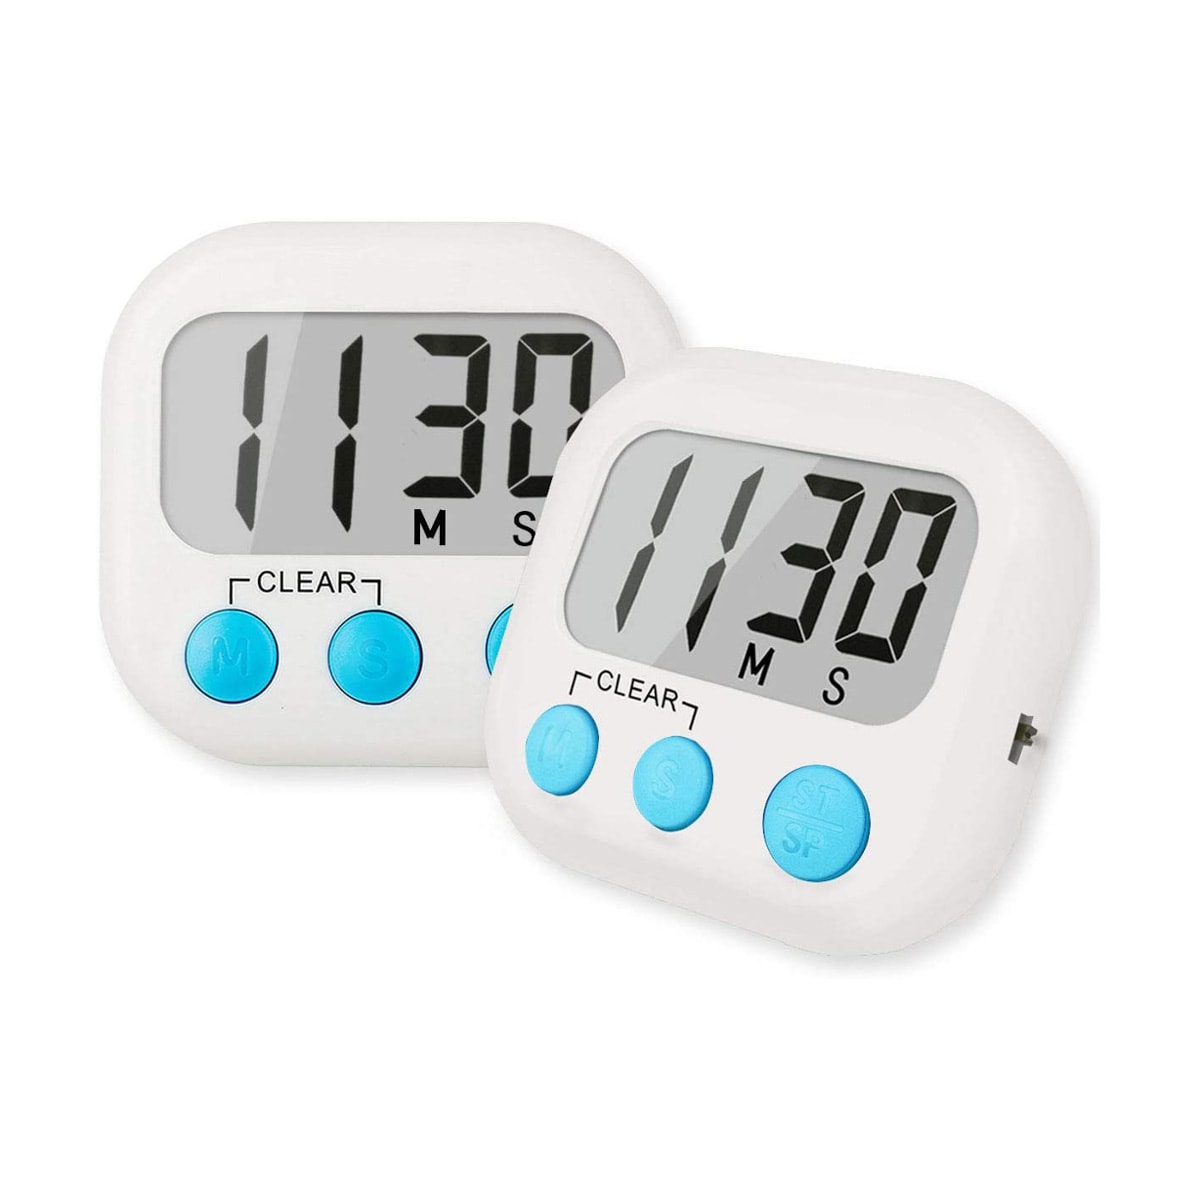 Two digital kitchen timers.